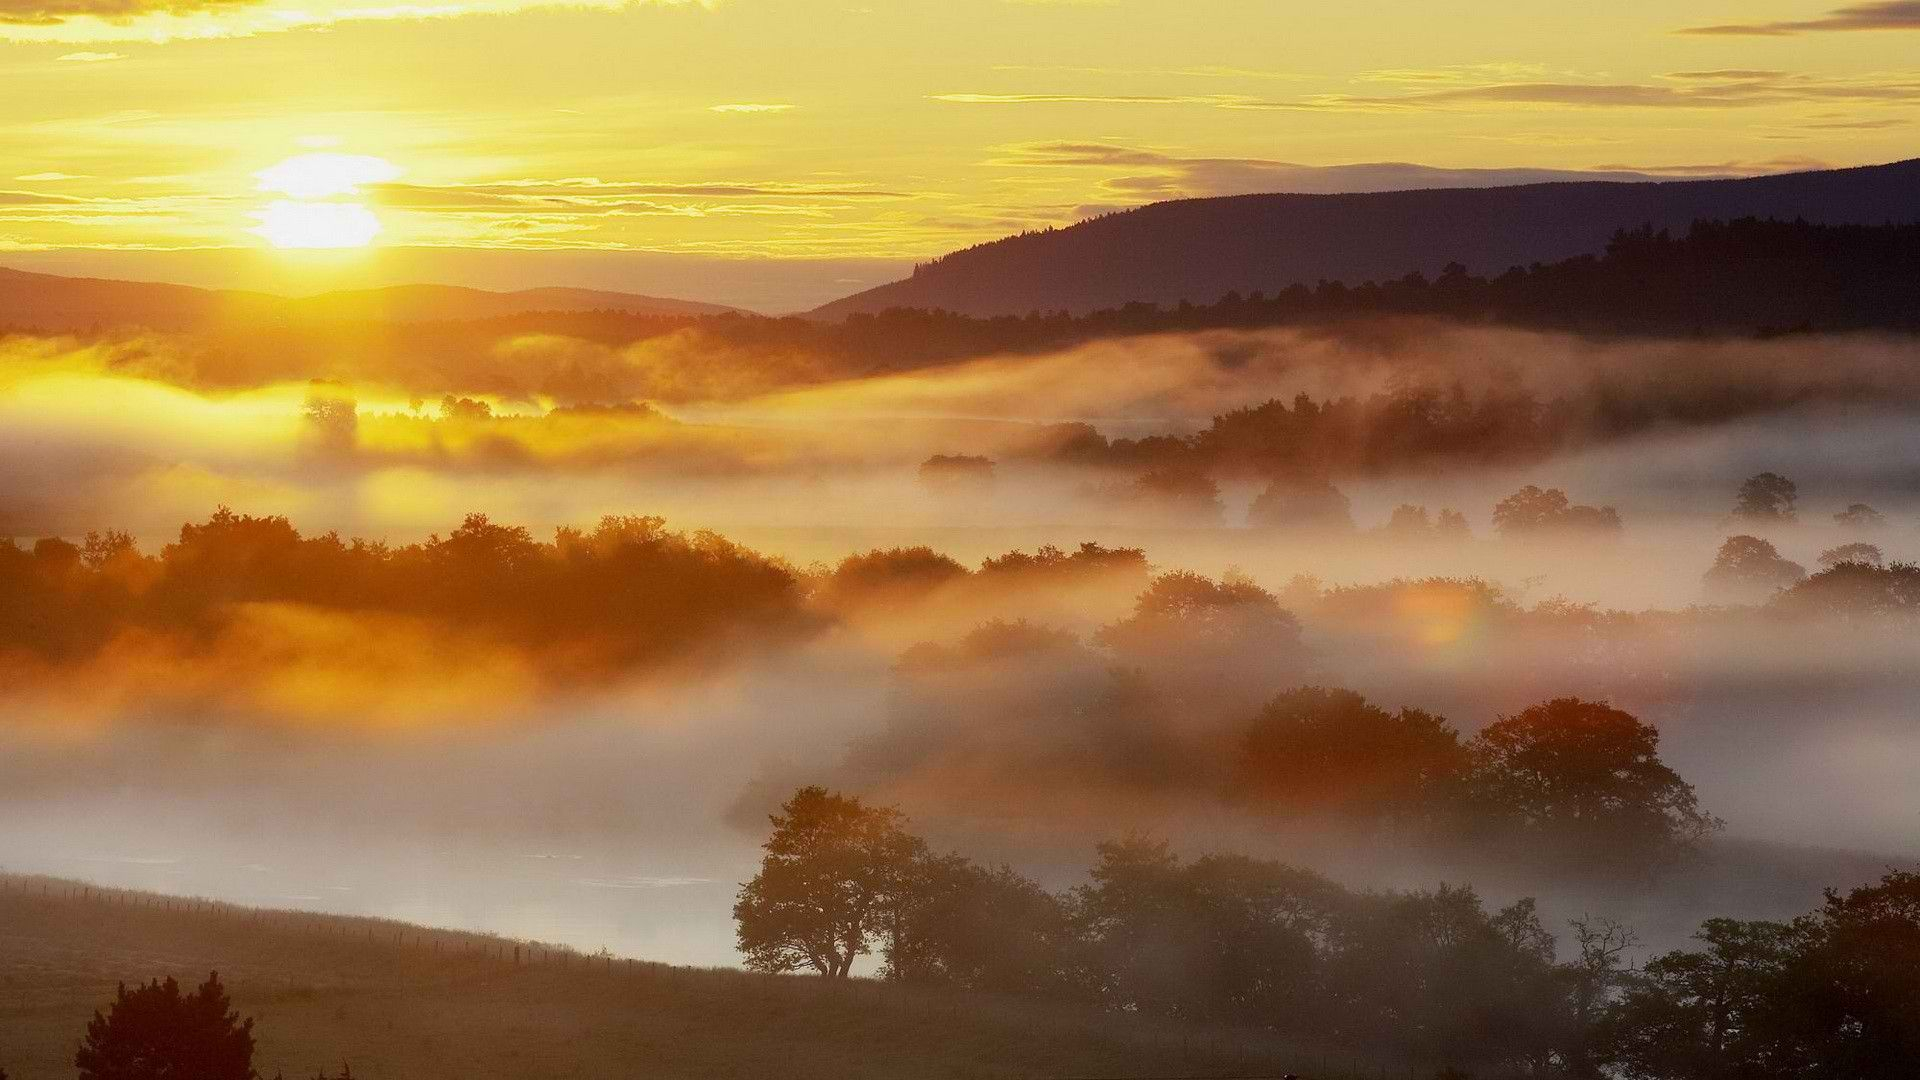 1920x1080 Sunrise and Misty Mountains | Sunset wallpaper, Sunrise wallpaper, Sunrise pictures